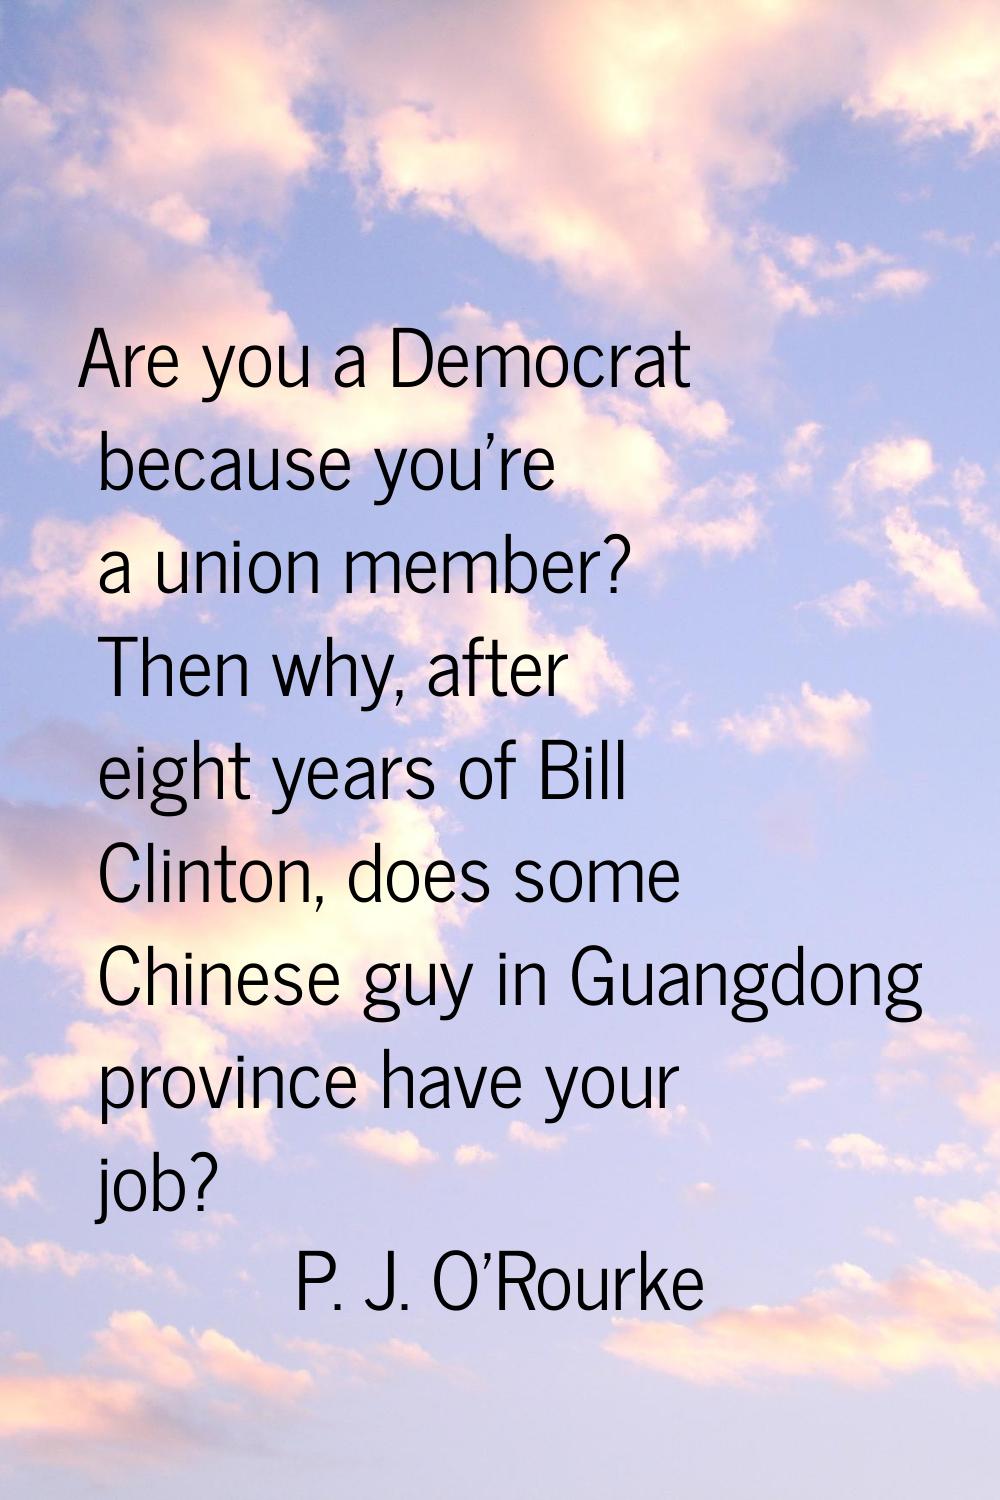 Are you a Democrat because you're a union member? Then why, after eight years of Bill Clinton, does